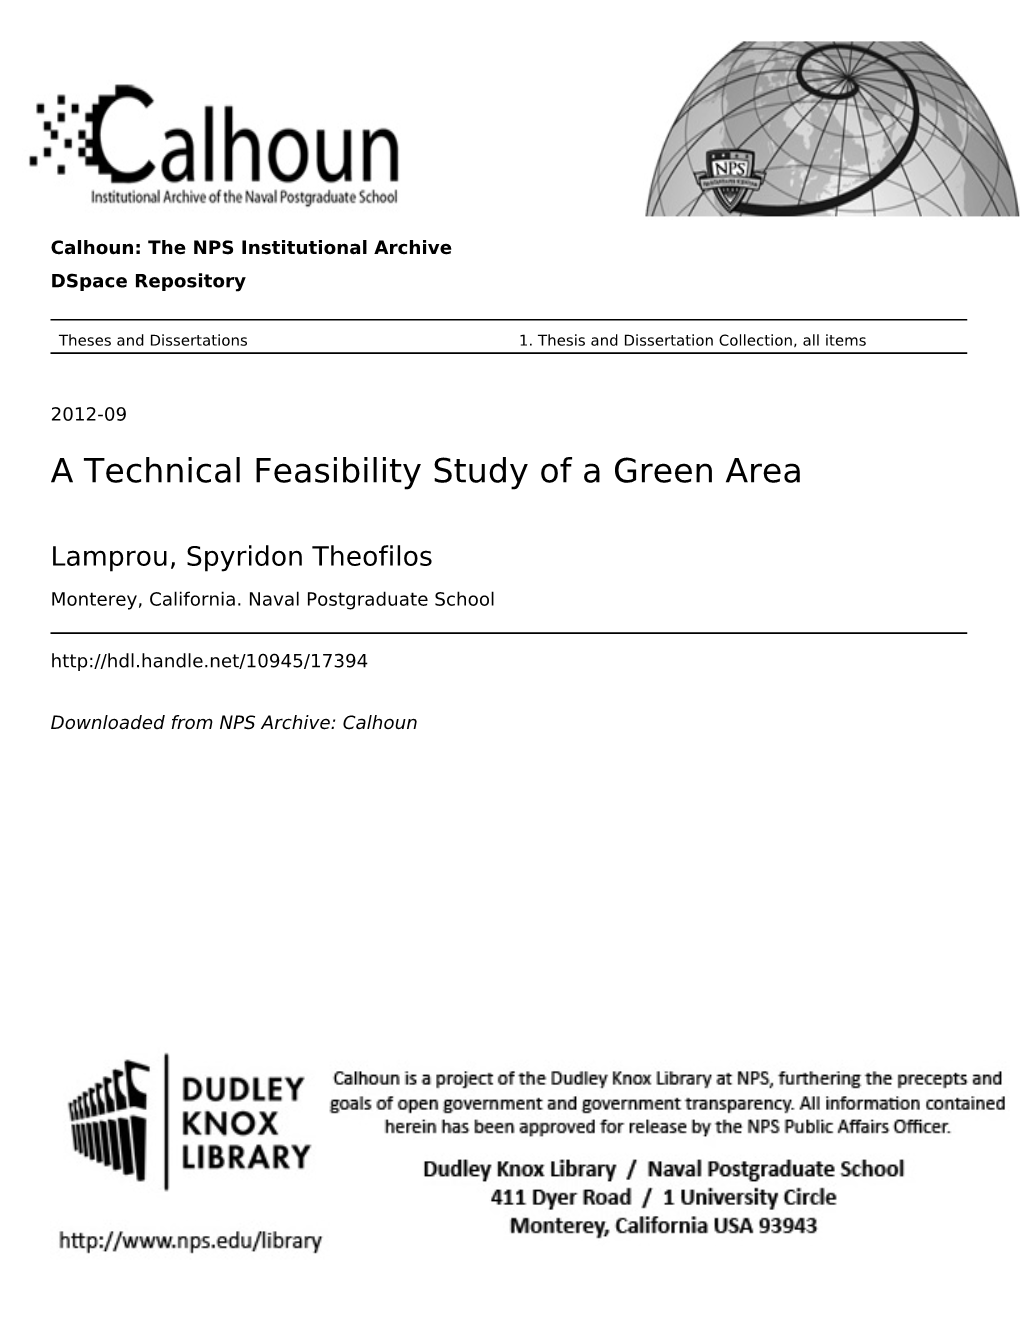 A Technical Feasibility Study of a Green Area